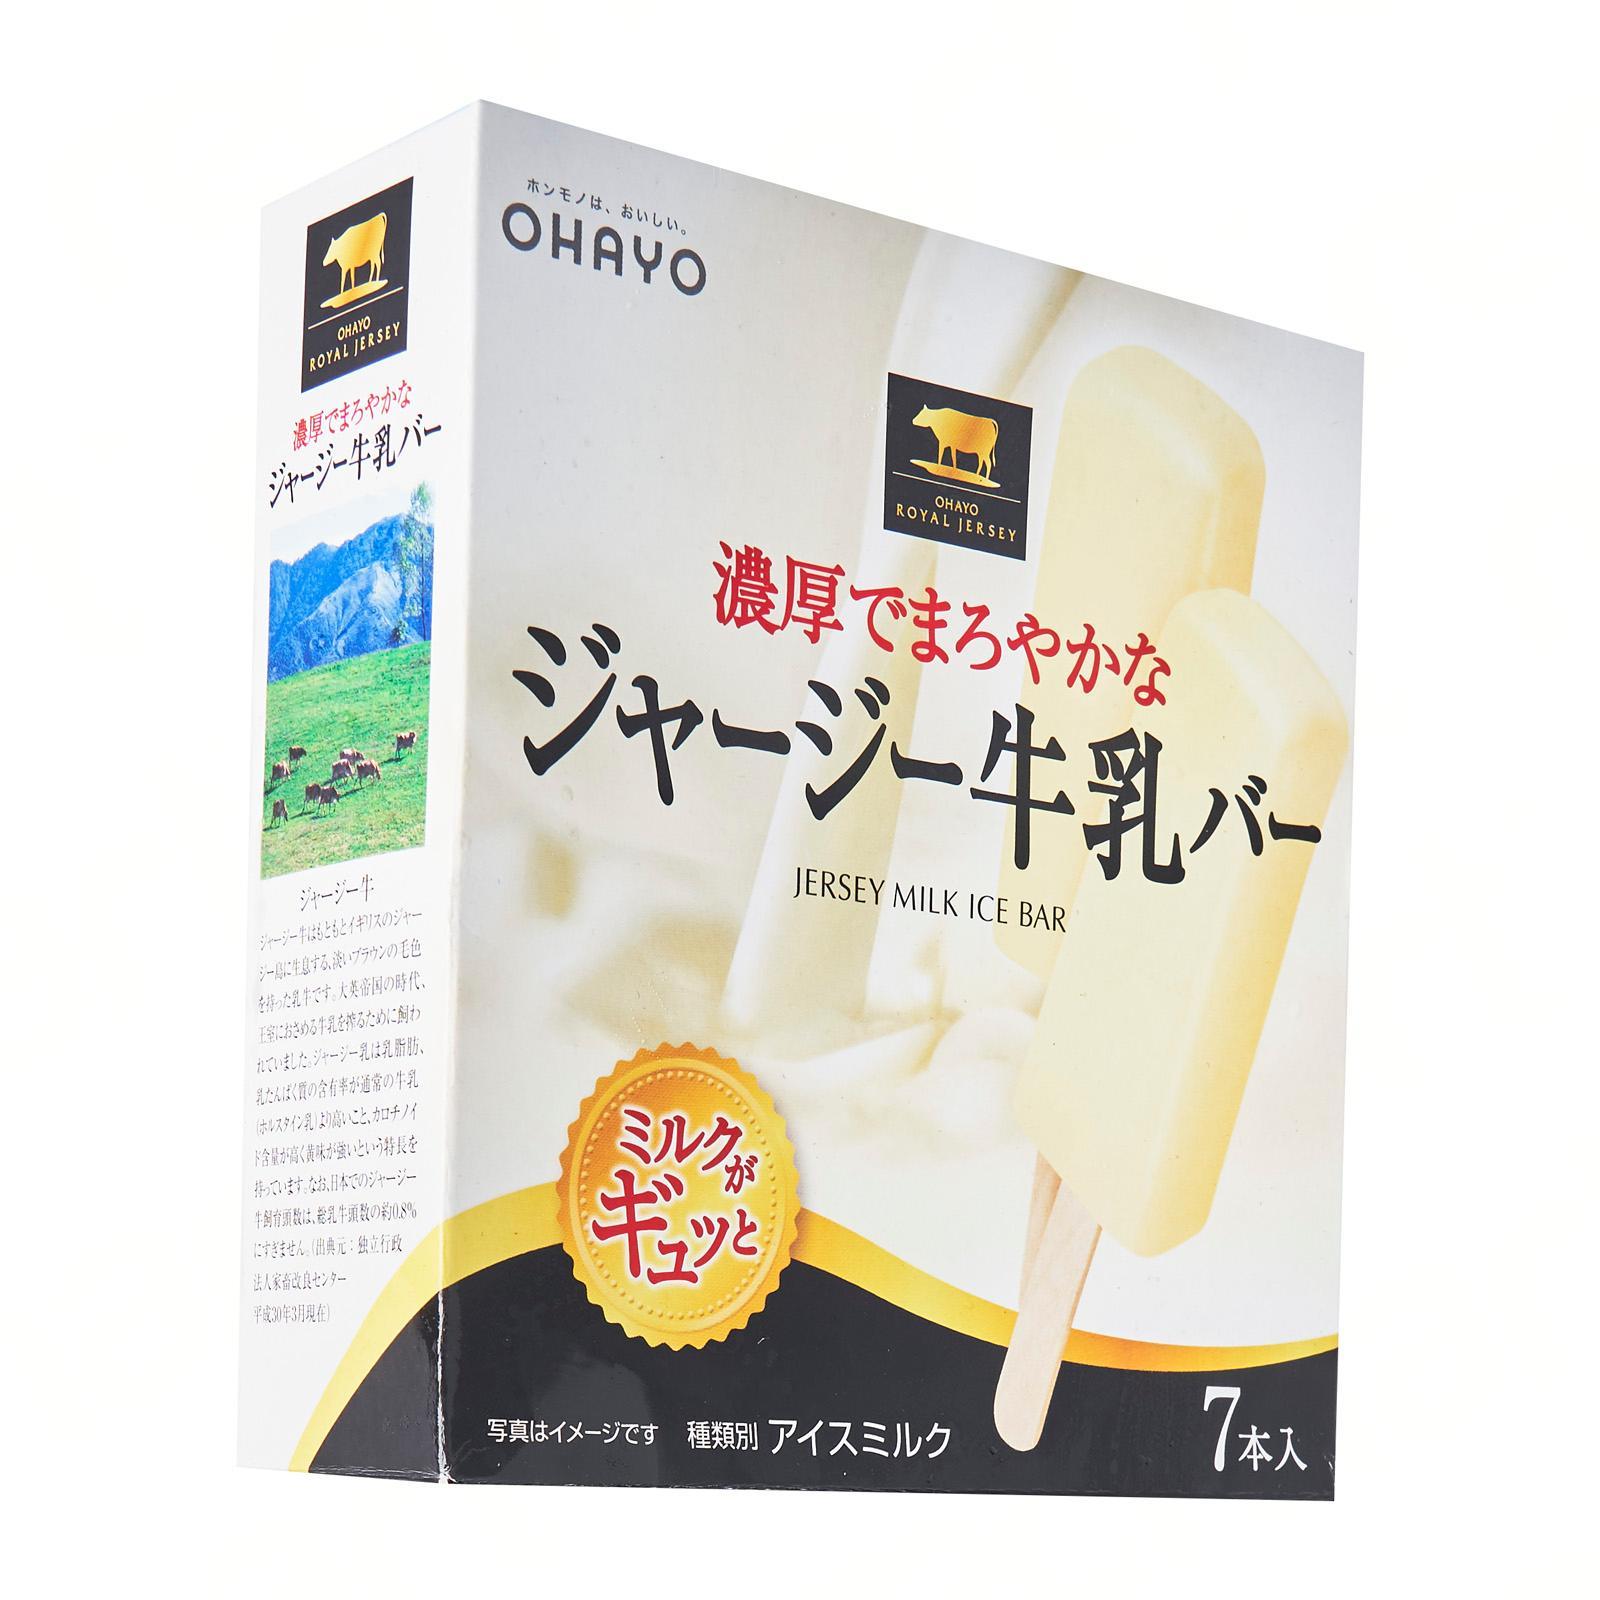 Doutor Cafe Au Lait  Nijiya Online Store - Japanese grocery and more